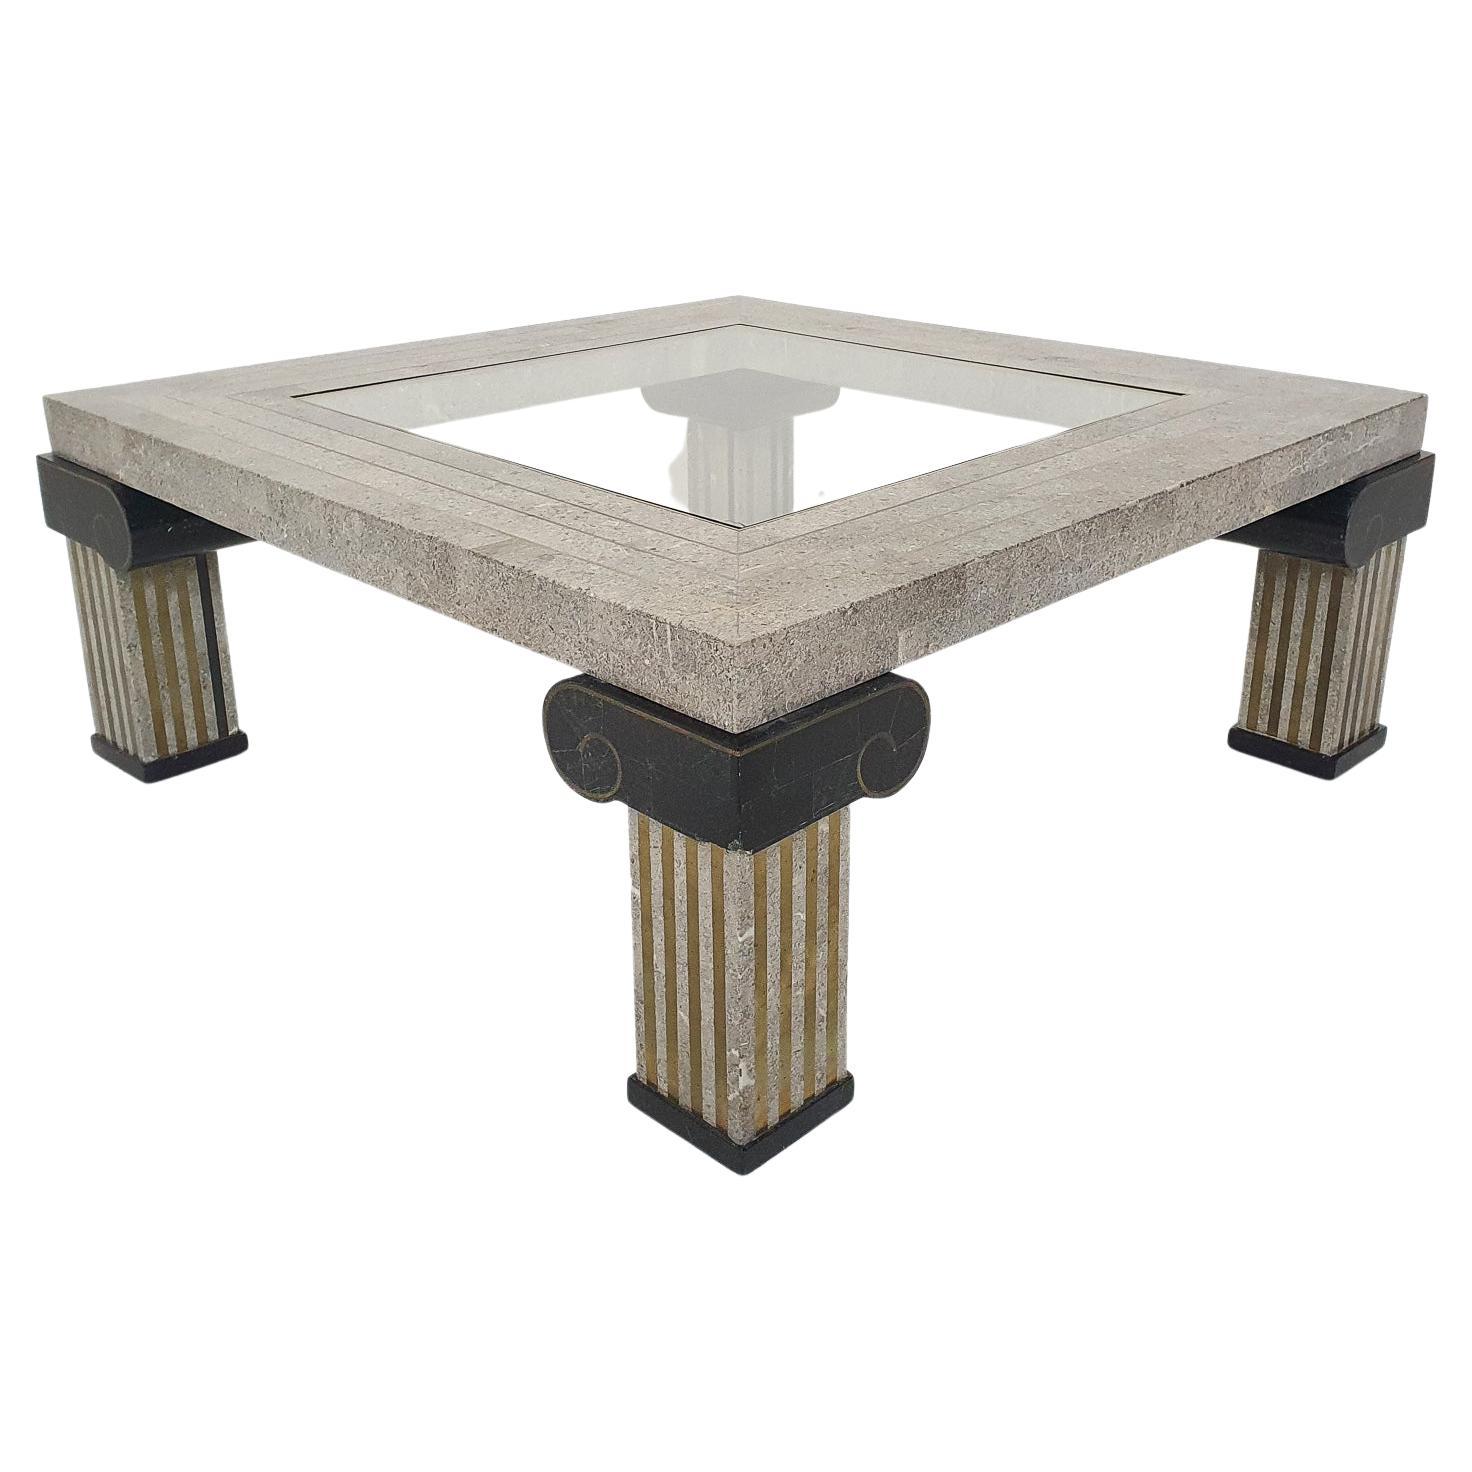 Maitland Smith Attrb. Tesselated Coffee Table, U.S.A, 1980's For Sale